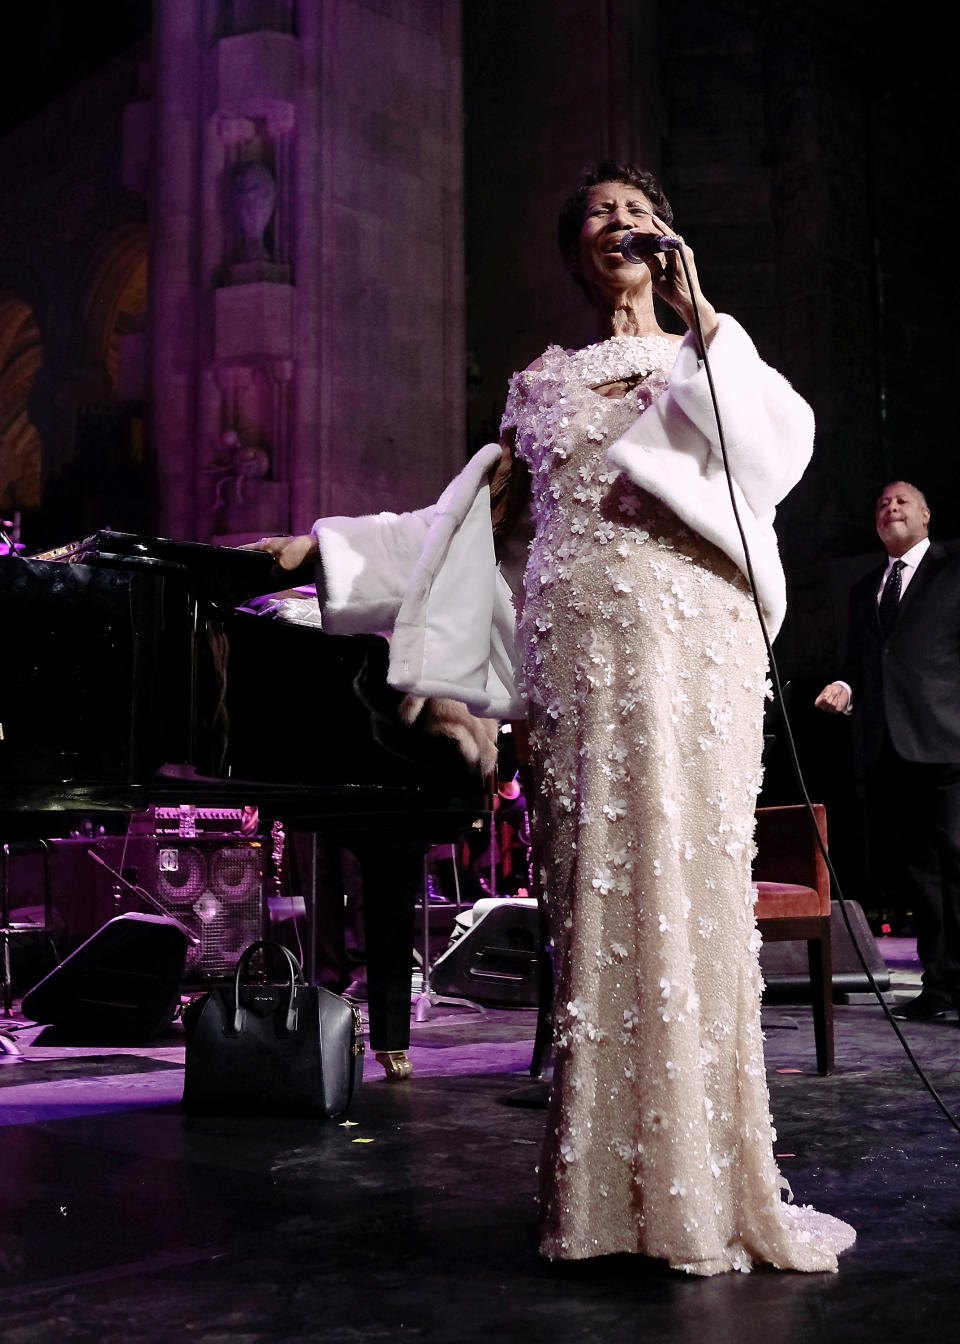 <p>At 75, Aretha Franklin was still going strong wearing a luxurious cream sequin gown decorated with floral appliqués and a white fur coat while performing at the Elton John AIDS Foundation Gala in New York City. (Photo: Getty Images) </p>